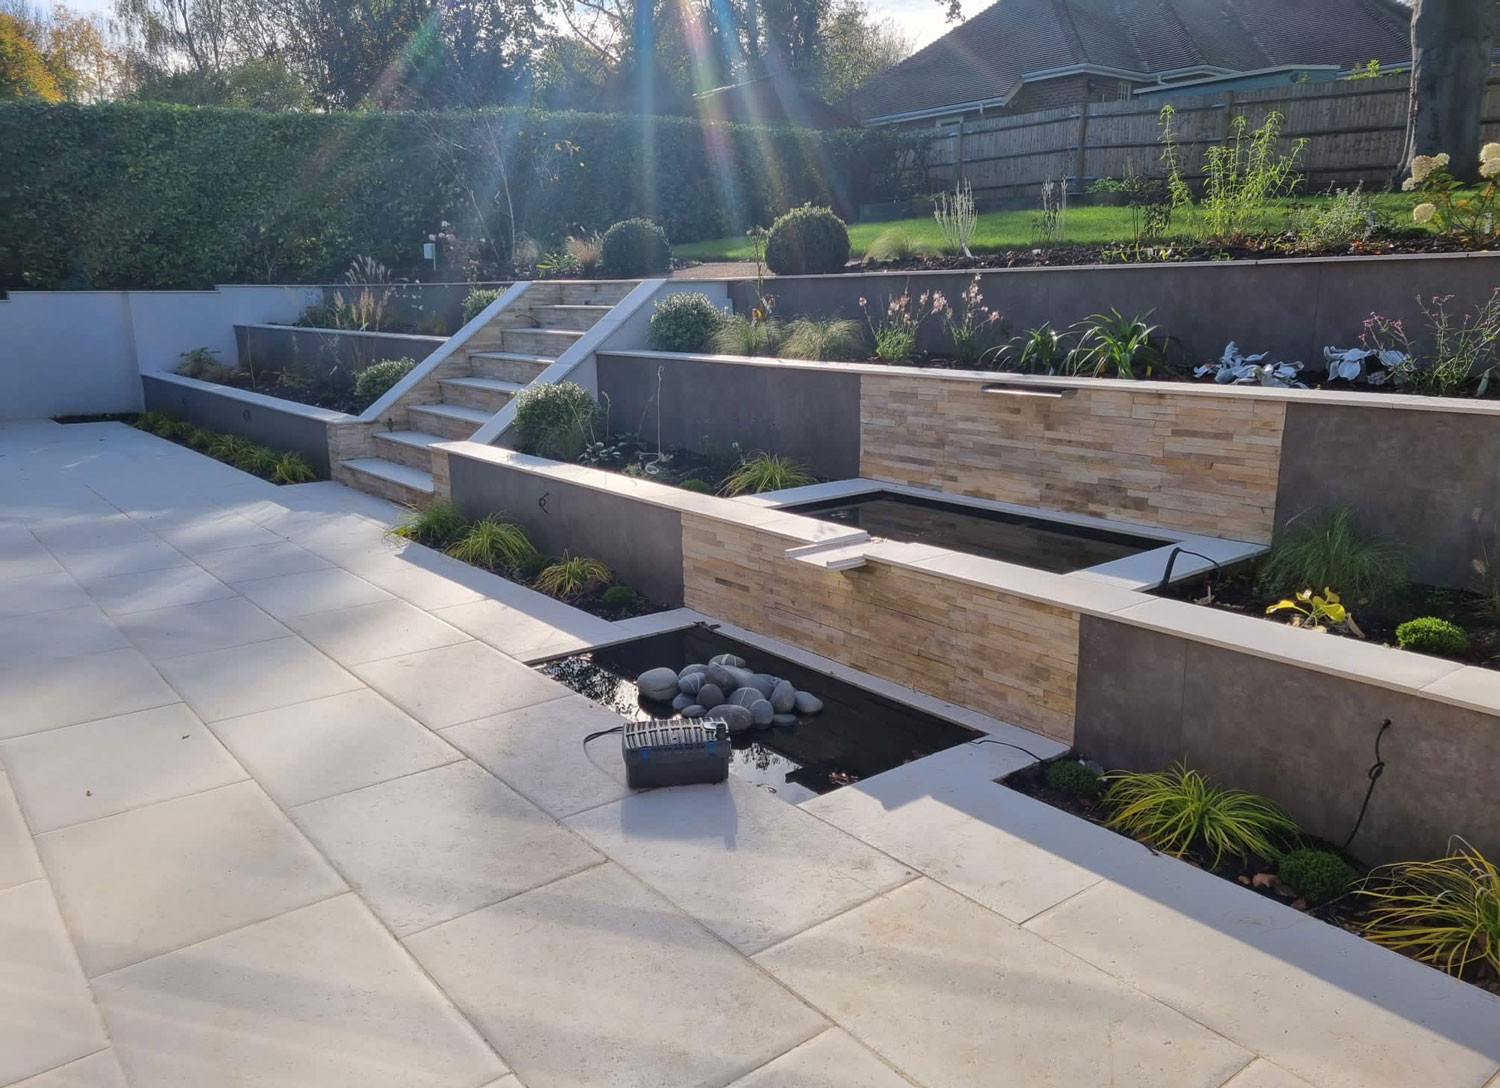 lovely english country garden with patio, water feature and retaining walls with steps to upper terrace